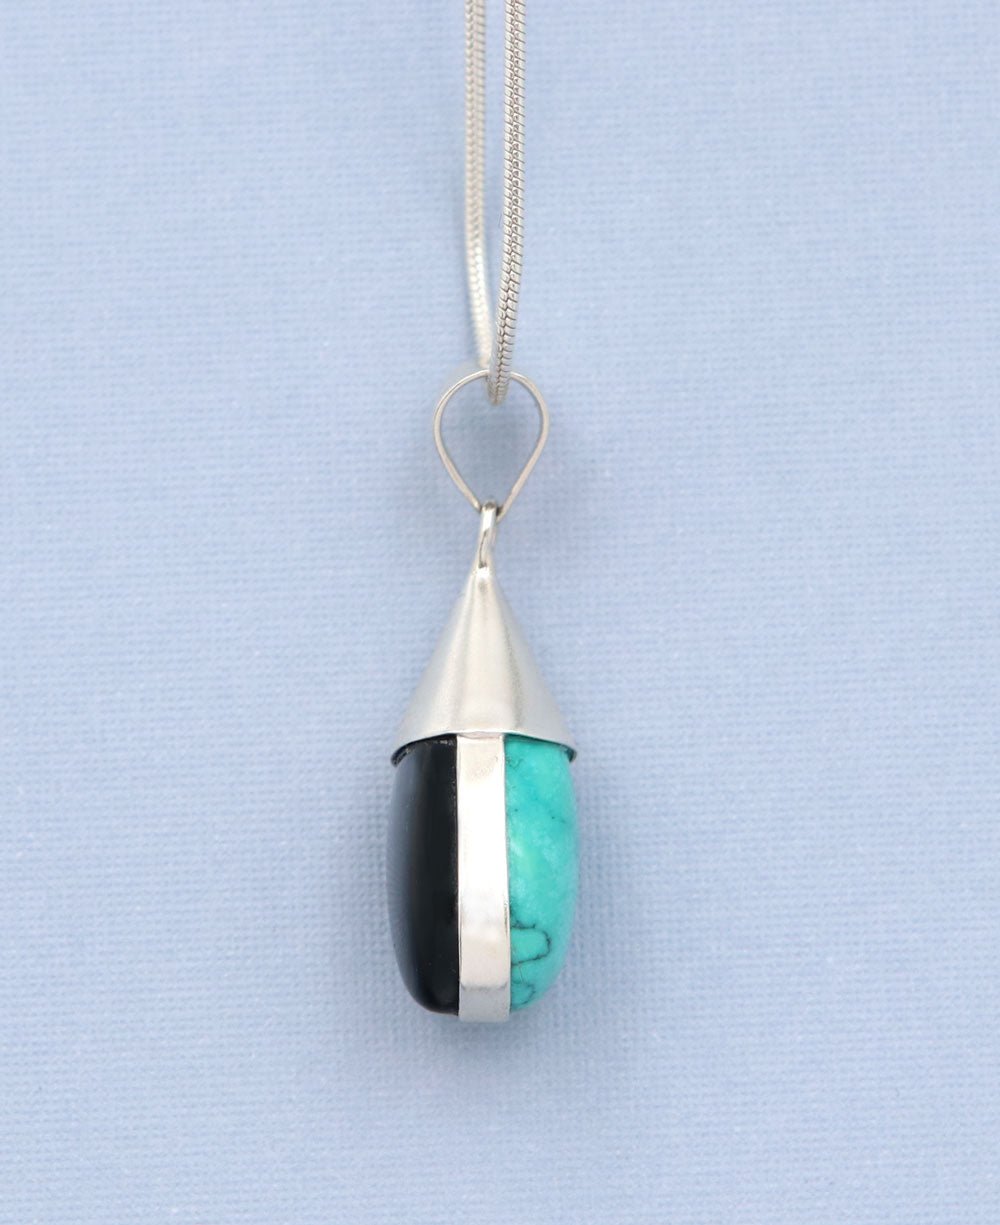 Turquoise and Onyx Gemstone Protection Pendant - Charms & Pendants